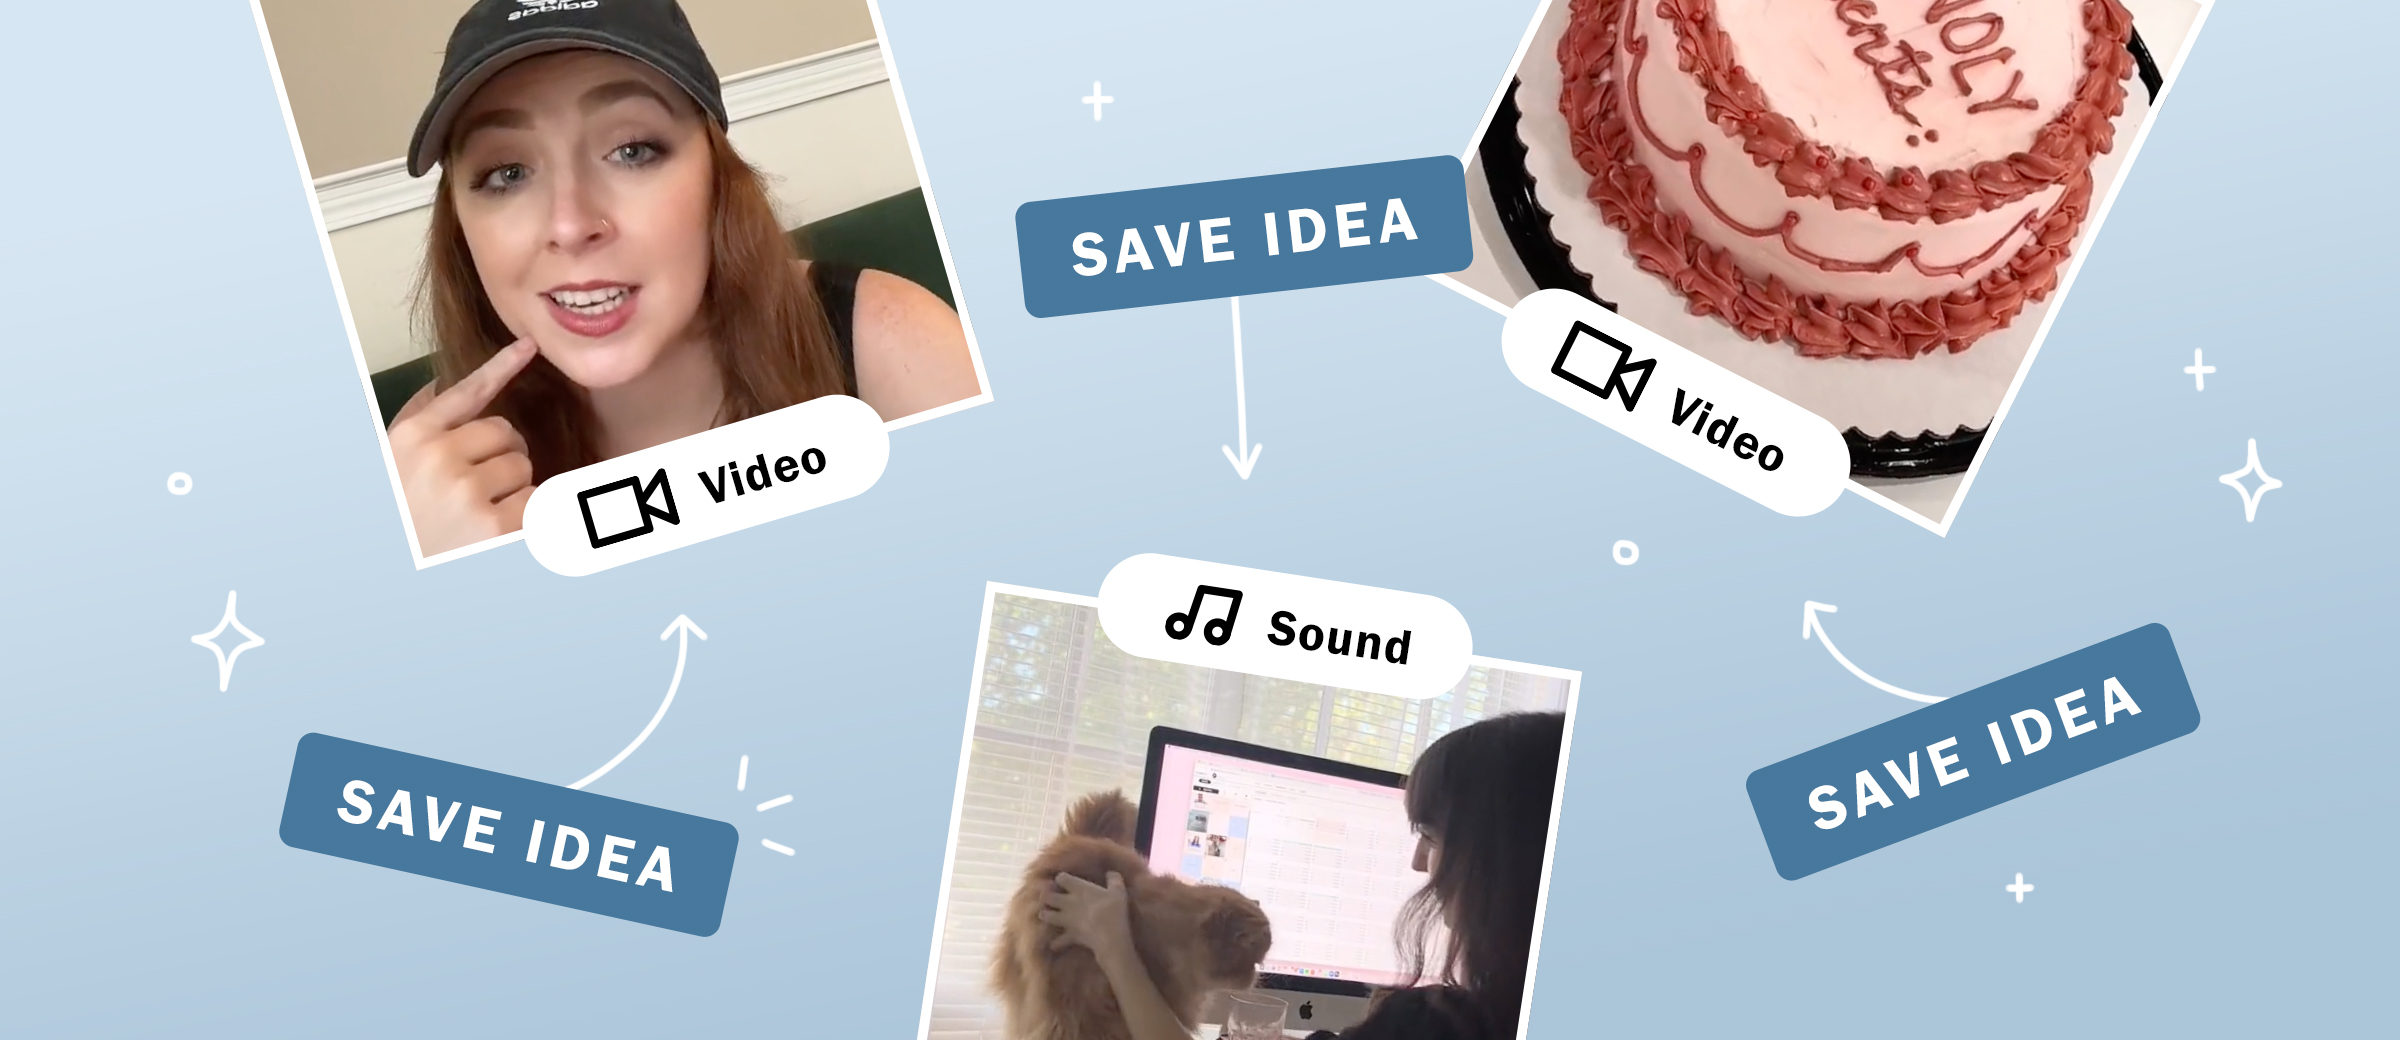 How to Save & Manage Your Video Ideas in PLANOLY, by jiana-khazma